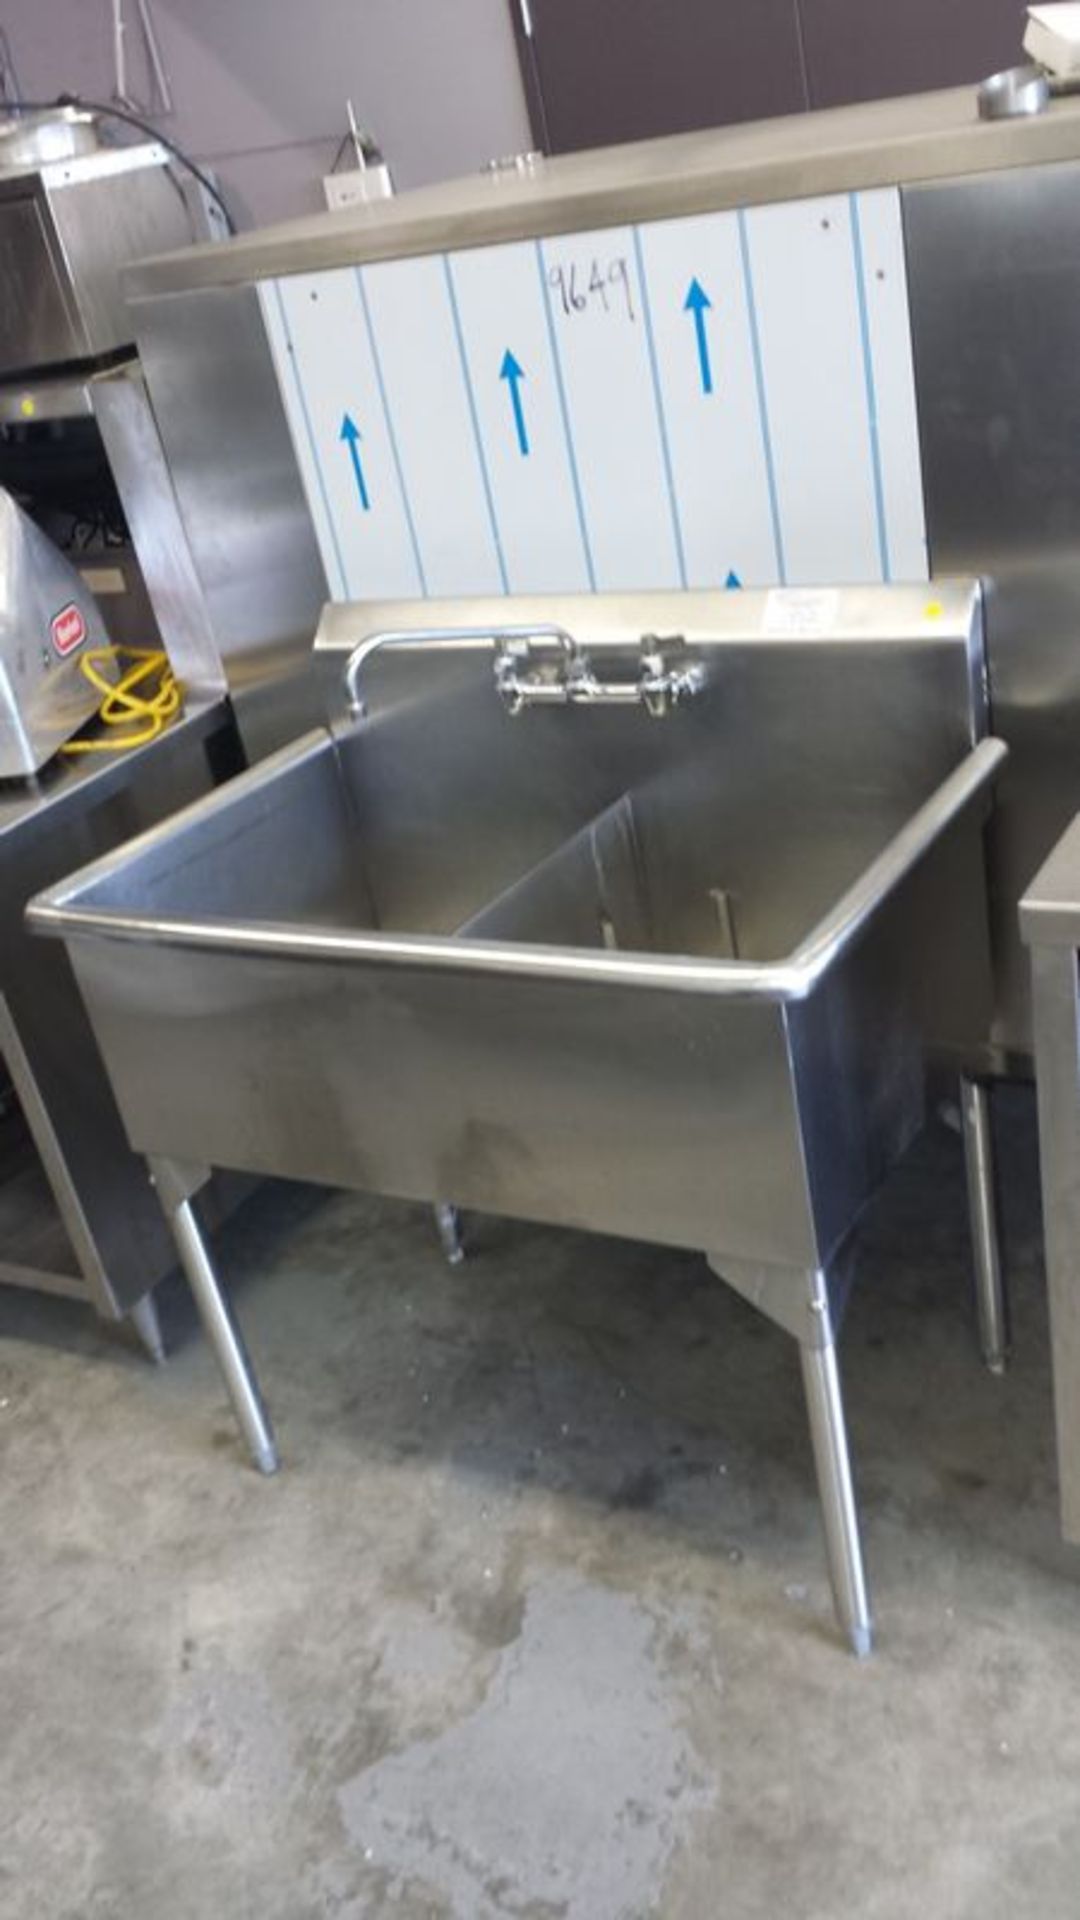 26 x 39 - 2 compartment stainless steel sink with taps